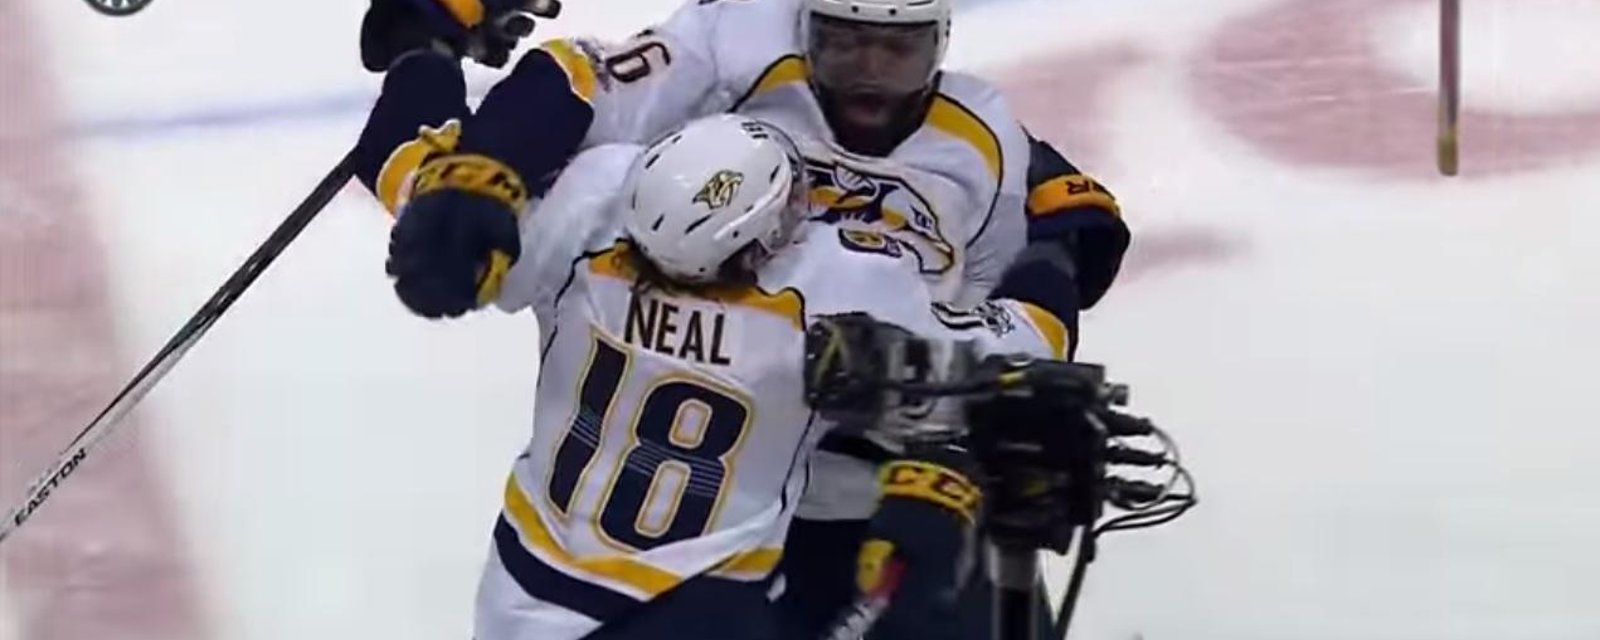 ICYMI : Neal's OT goal that fired Nashville up! 